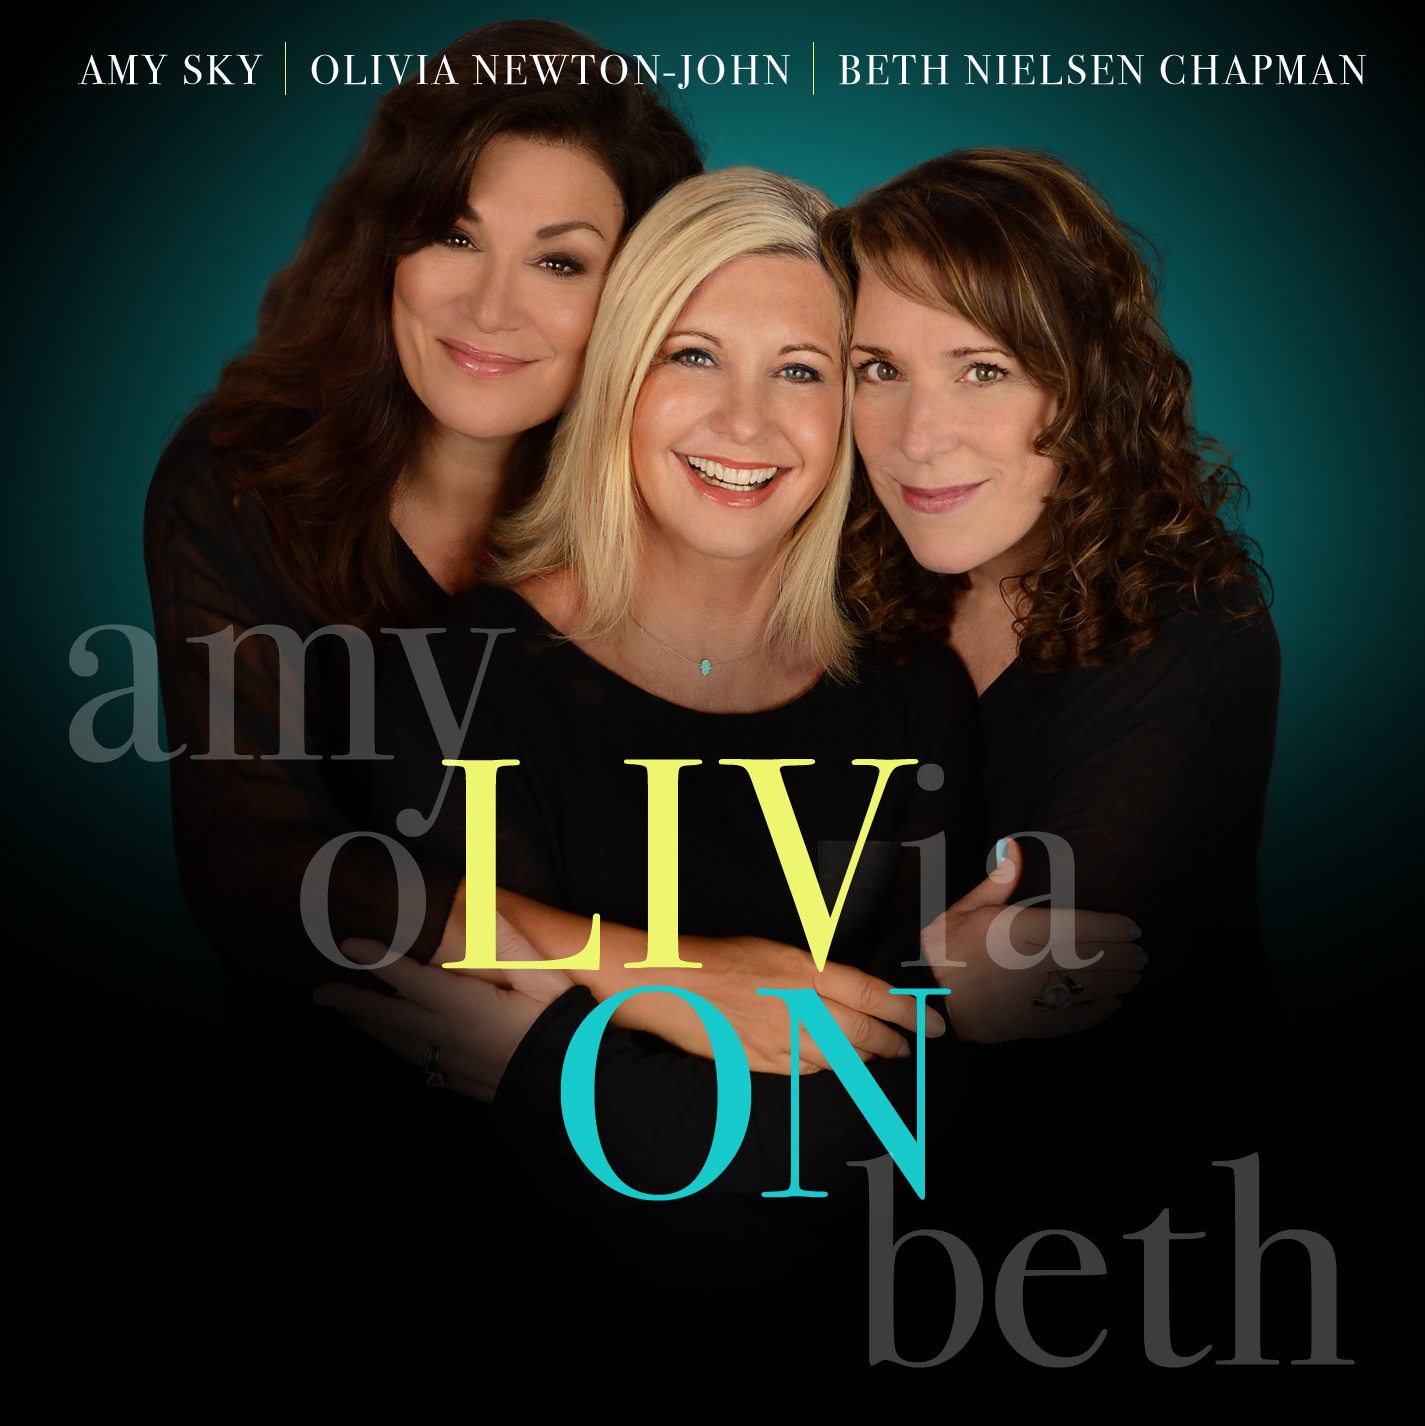 "LIV ON" CD cover - featuring Amy Sky, Olivia Newton-John and Beth Nielsen Chapman